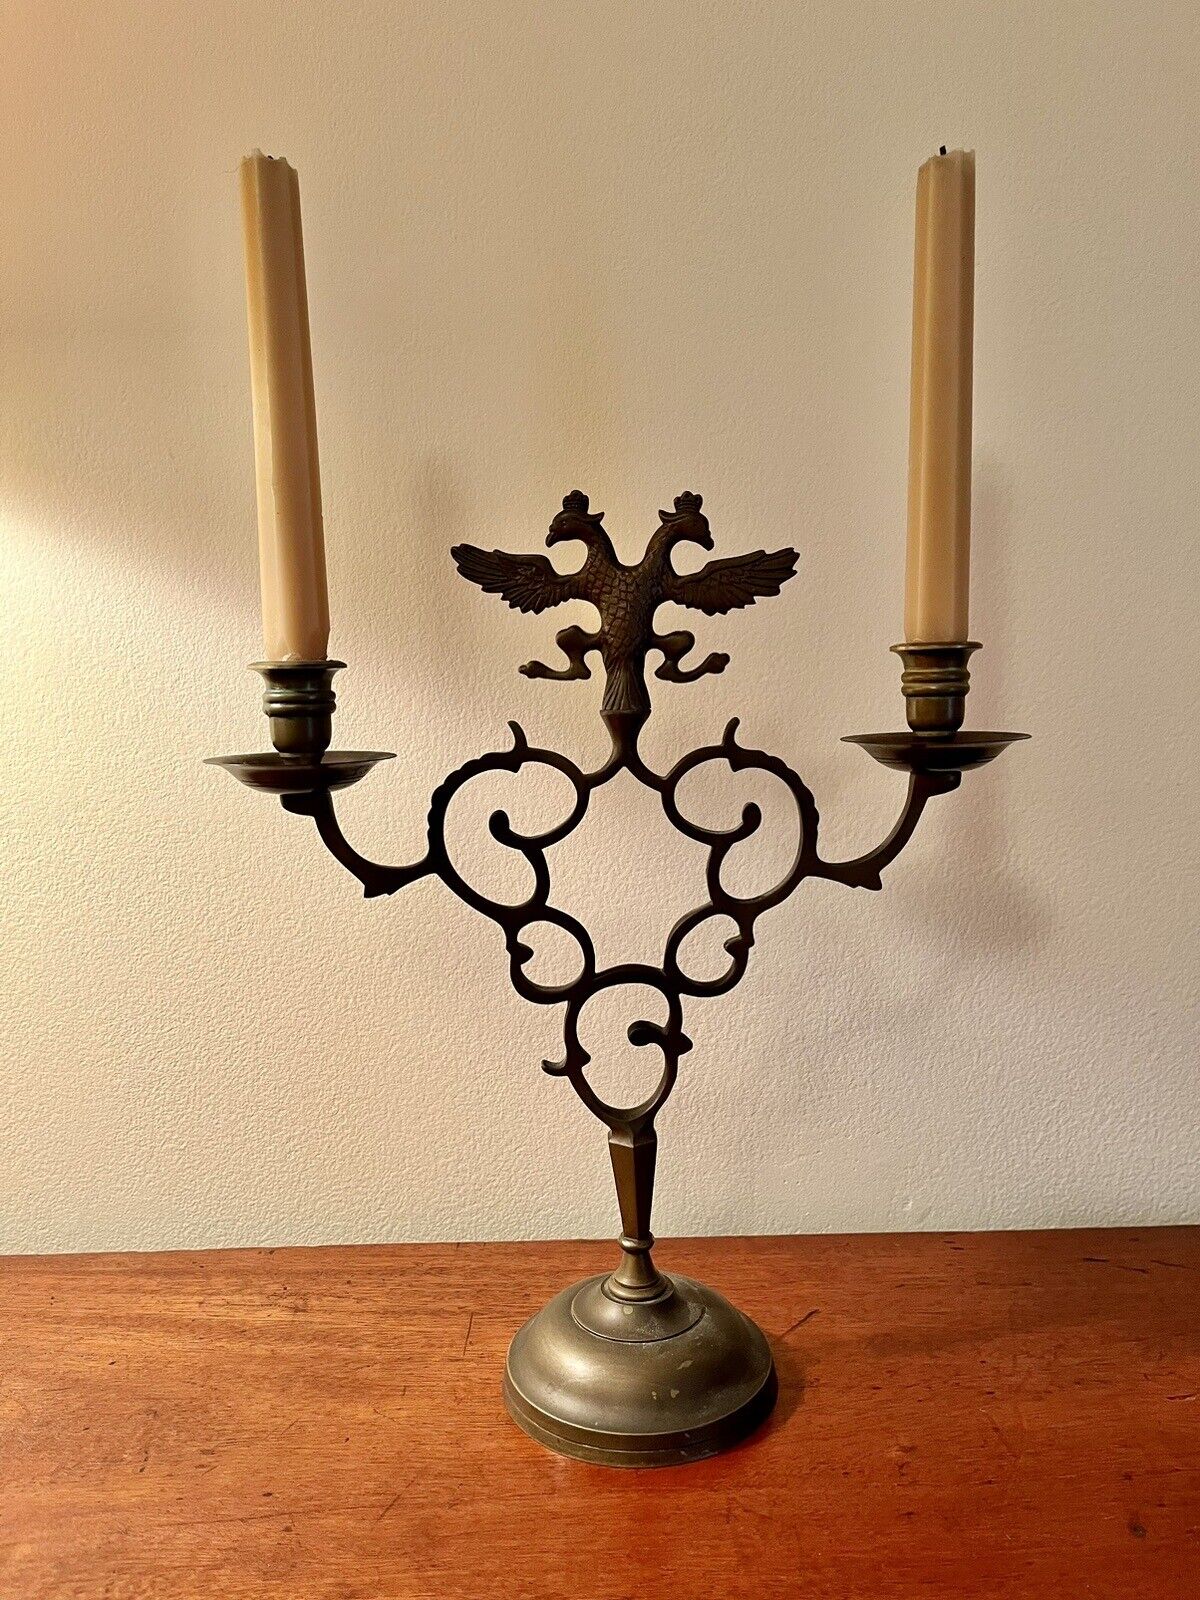 Vintage bronze double headed eagle candelabra from German/Polish home, 1920s